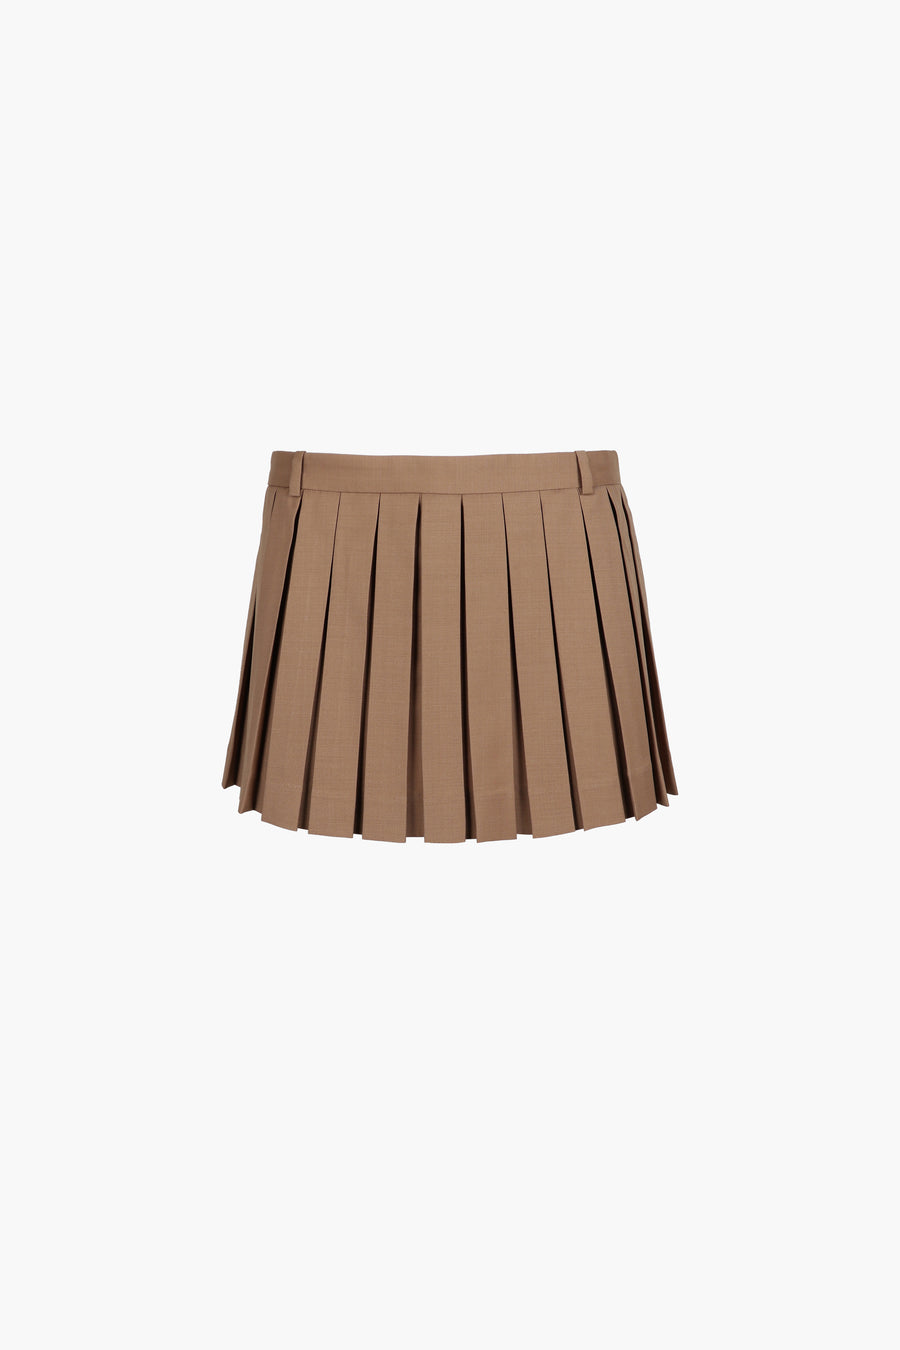 Pleated mini skirt in taupe with eyelet panel at back